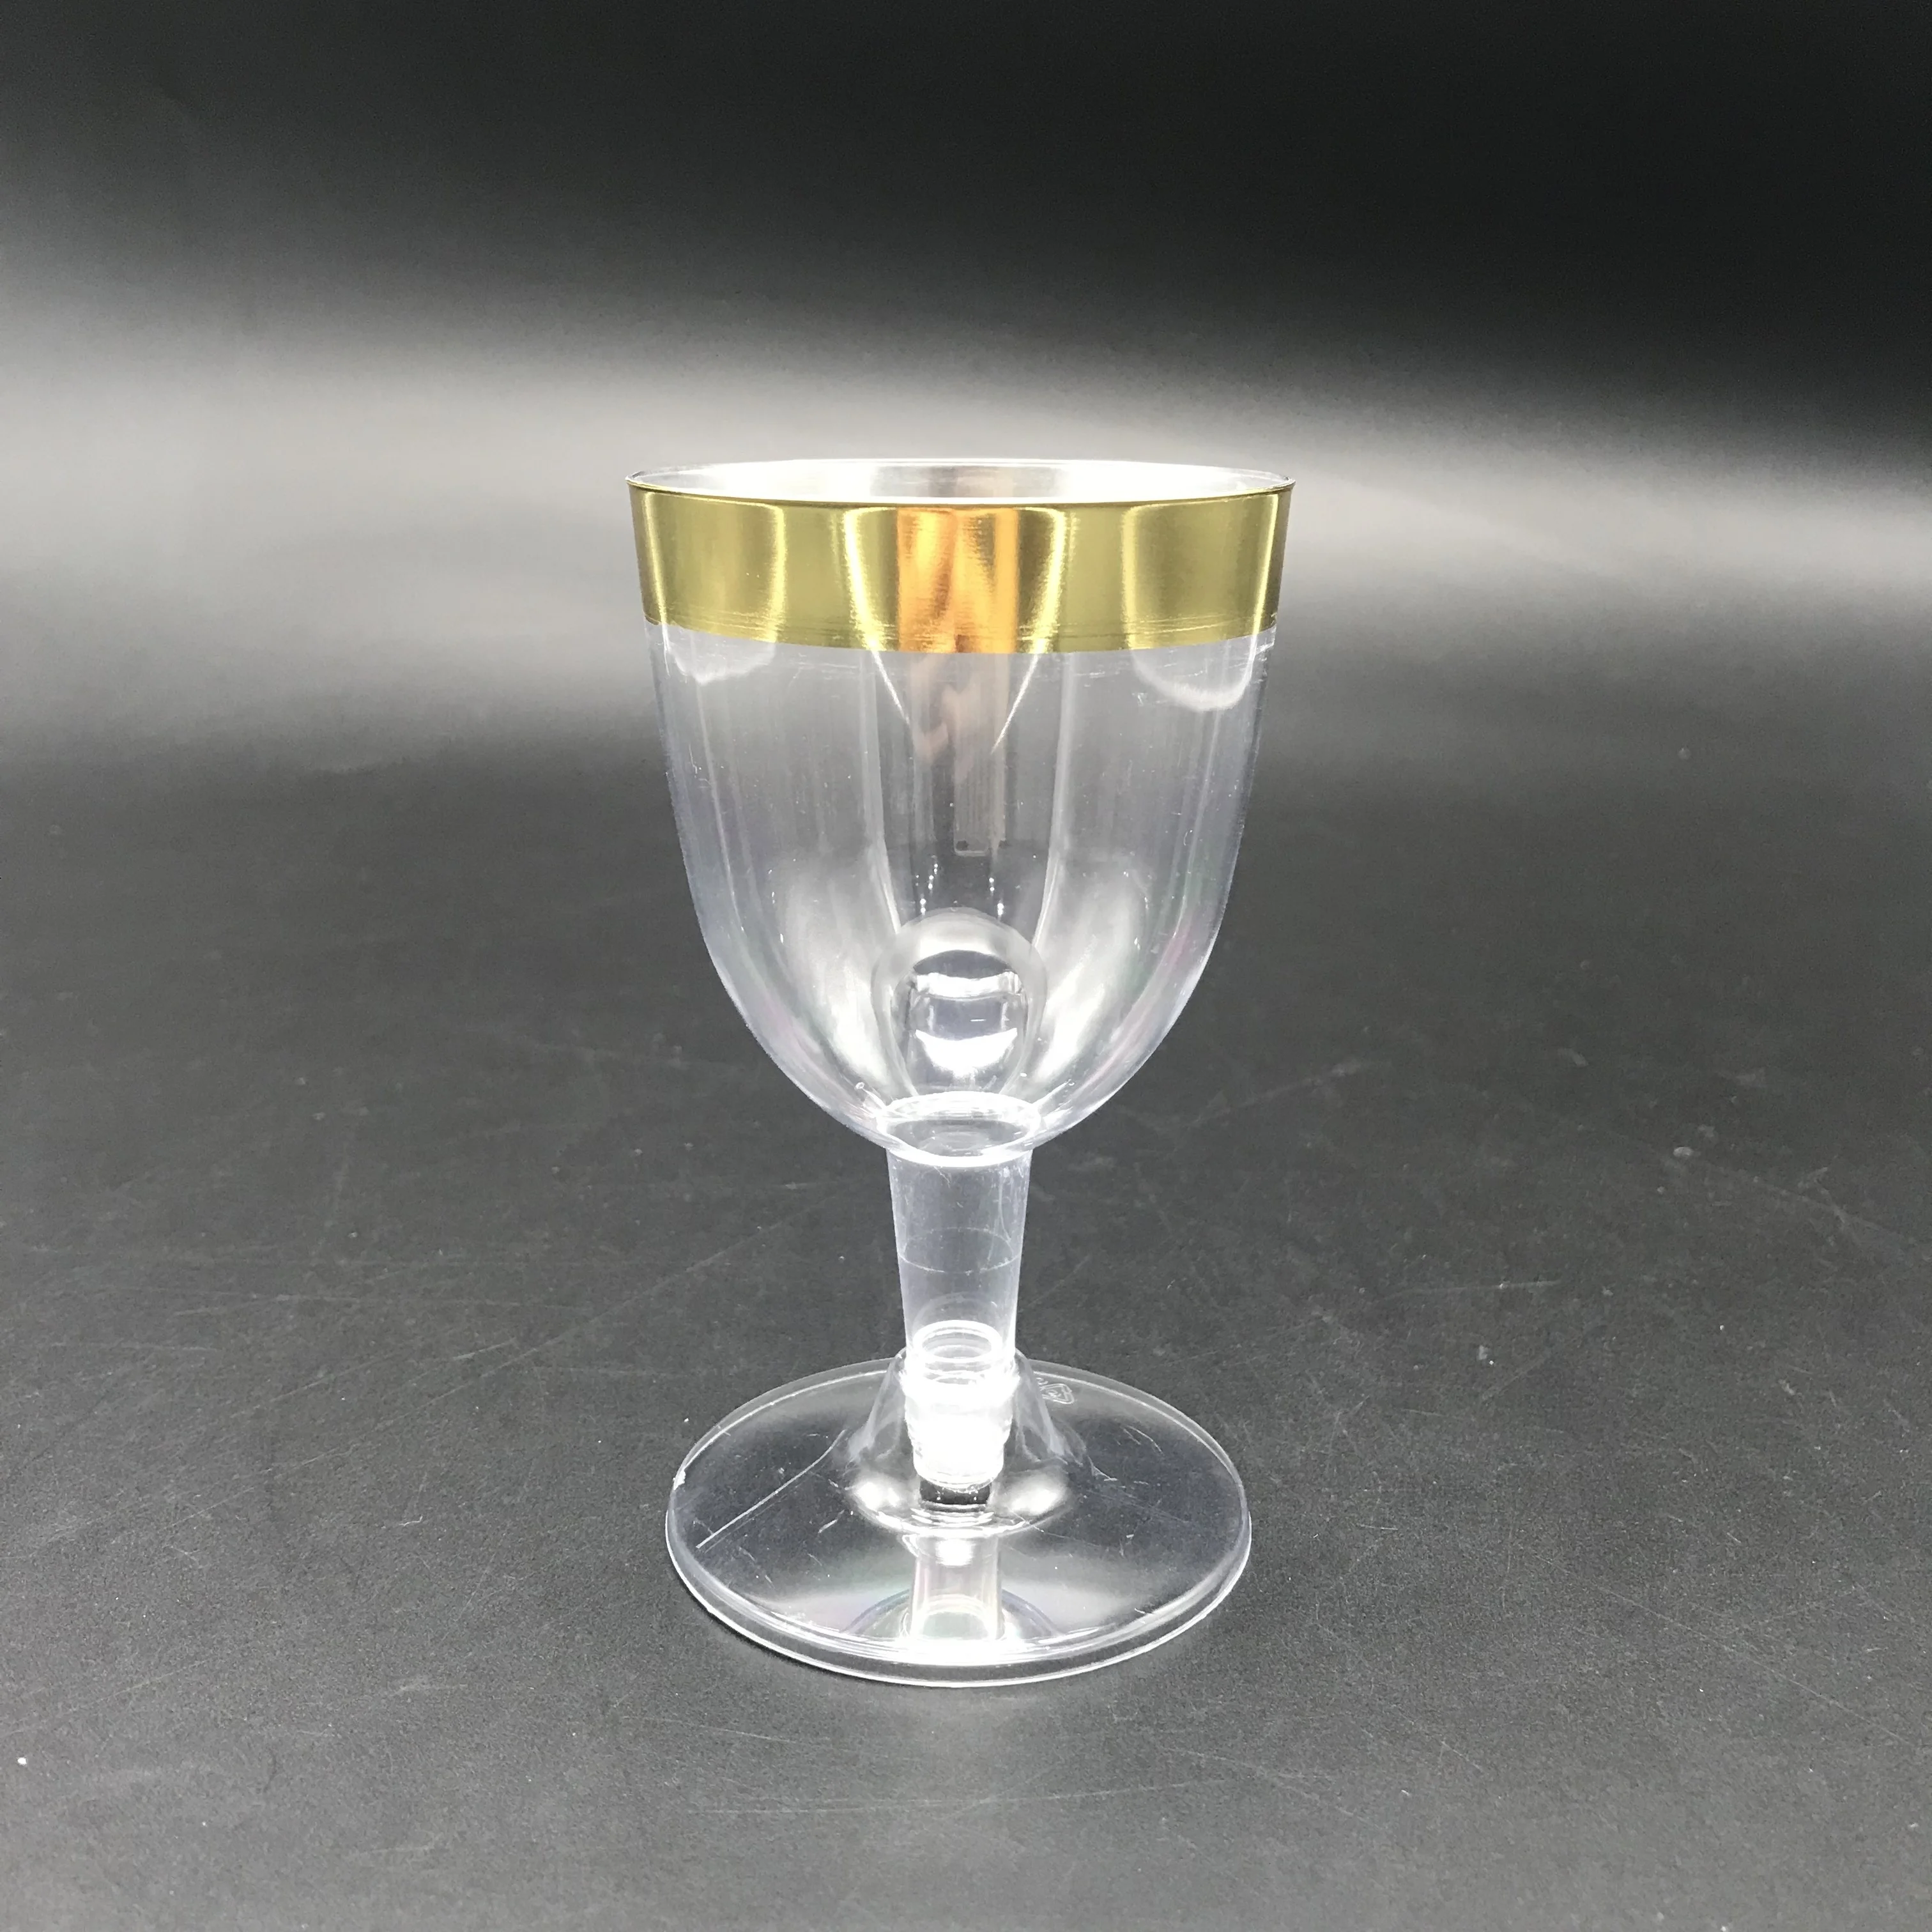 gold disposable wine glasses